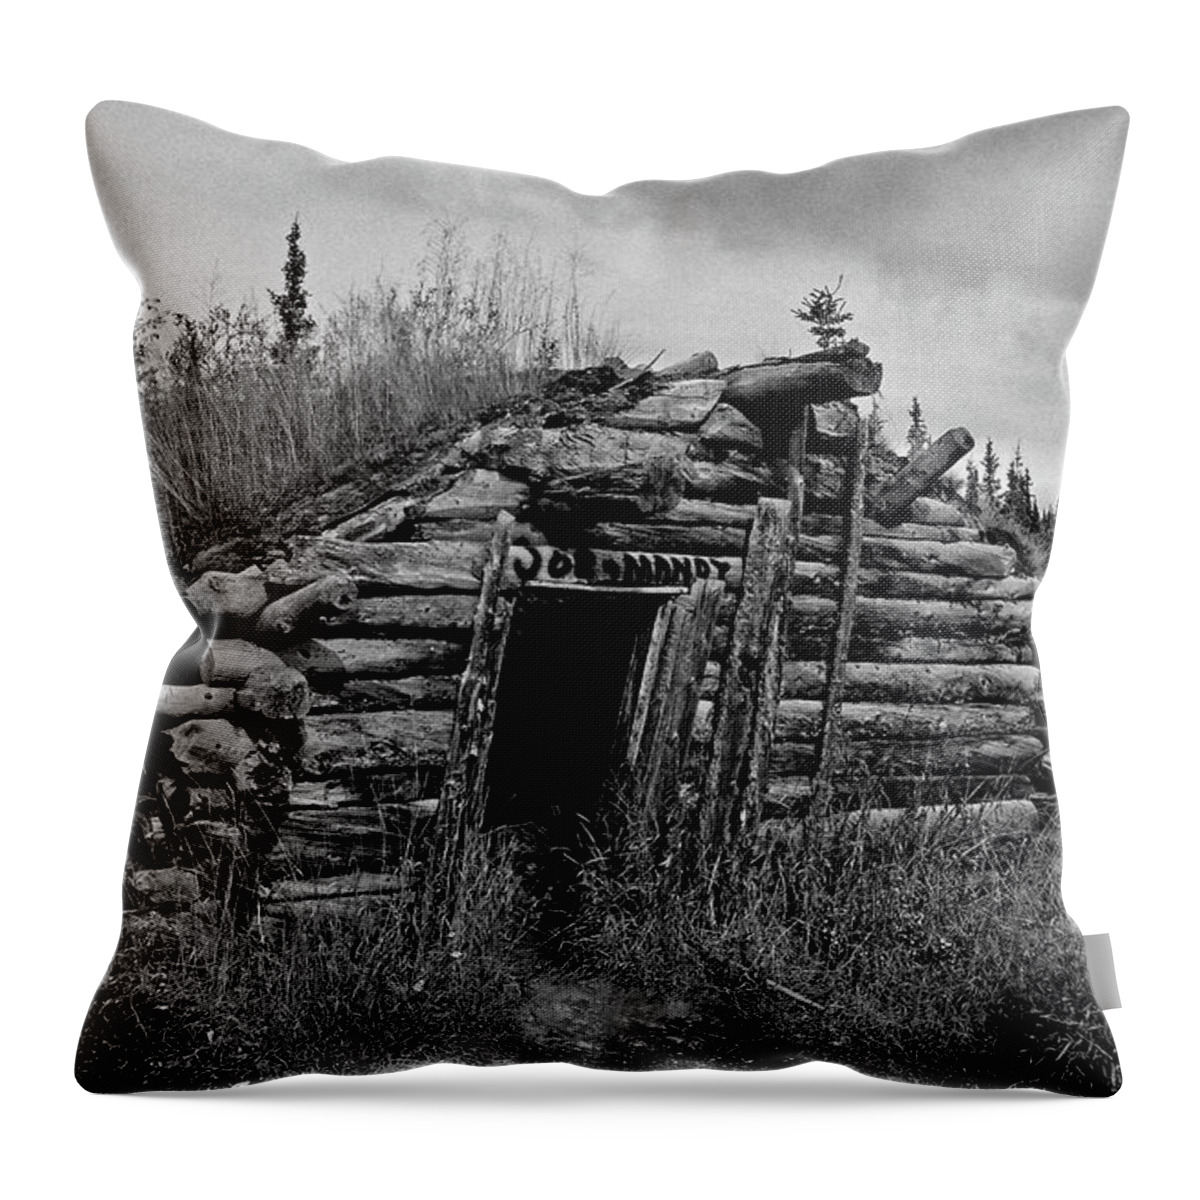 Gold Throw Pillow featuring the photograph Gold Rush Cabin - Yukon by Juergen Weiss